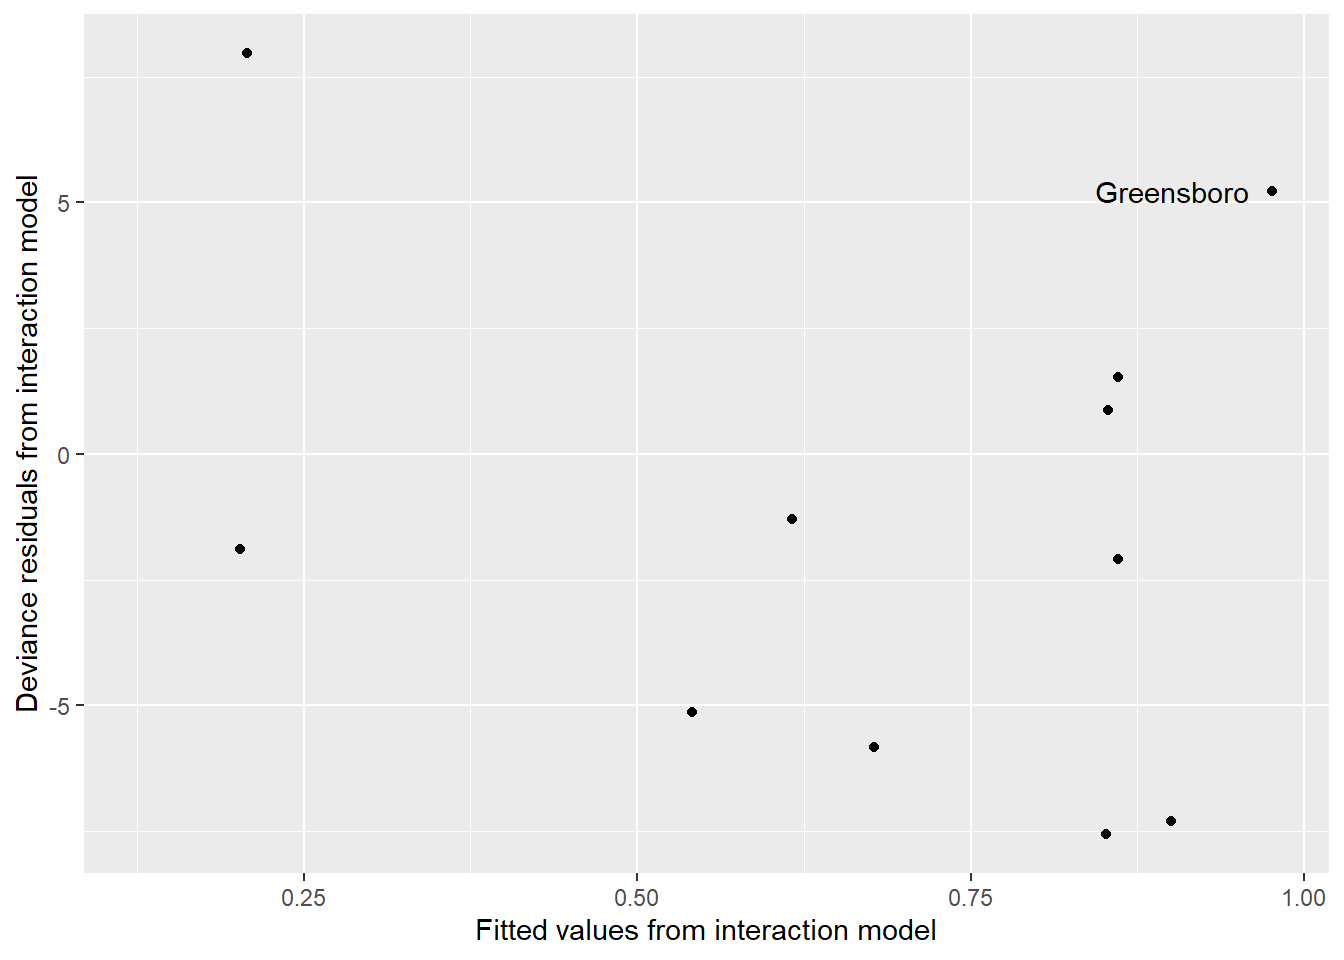 Fitted values by residuals for the interaction model for the Railroad Referendum data.